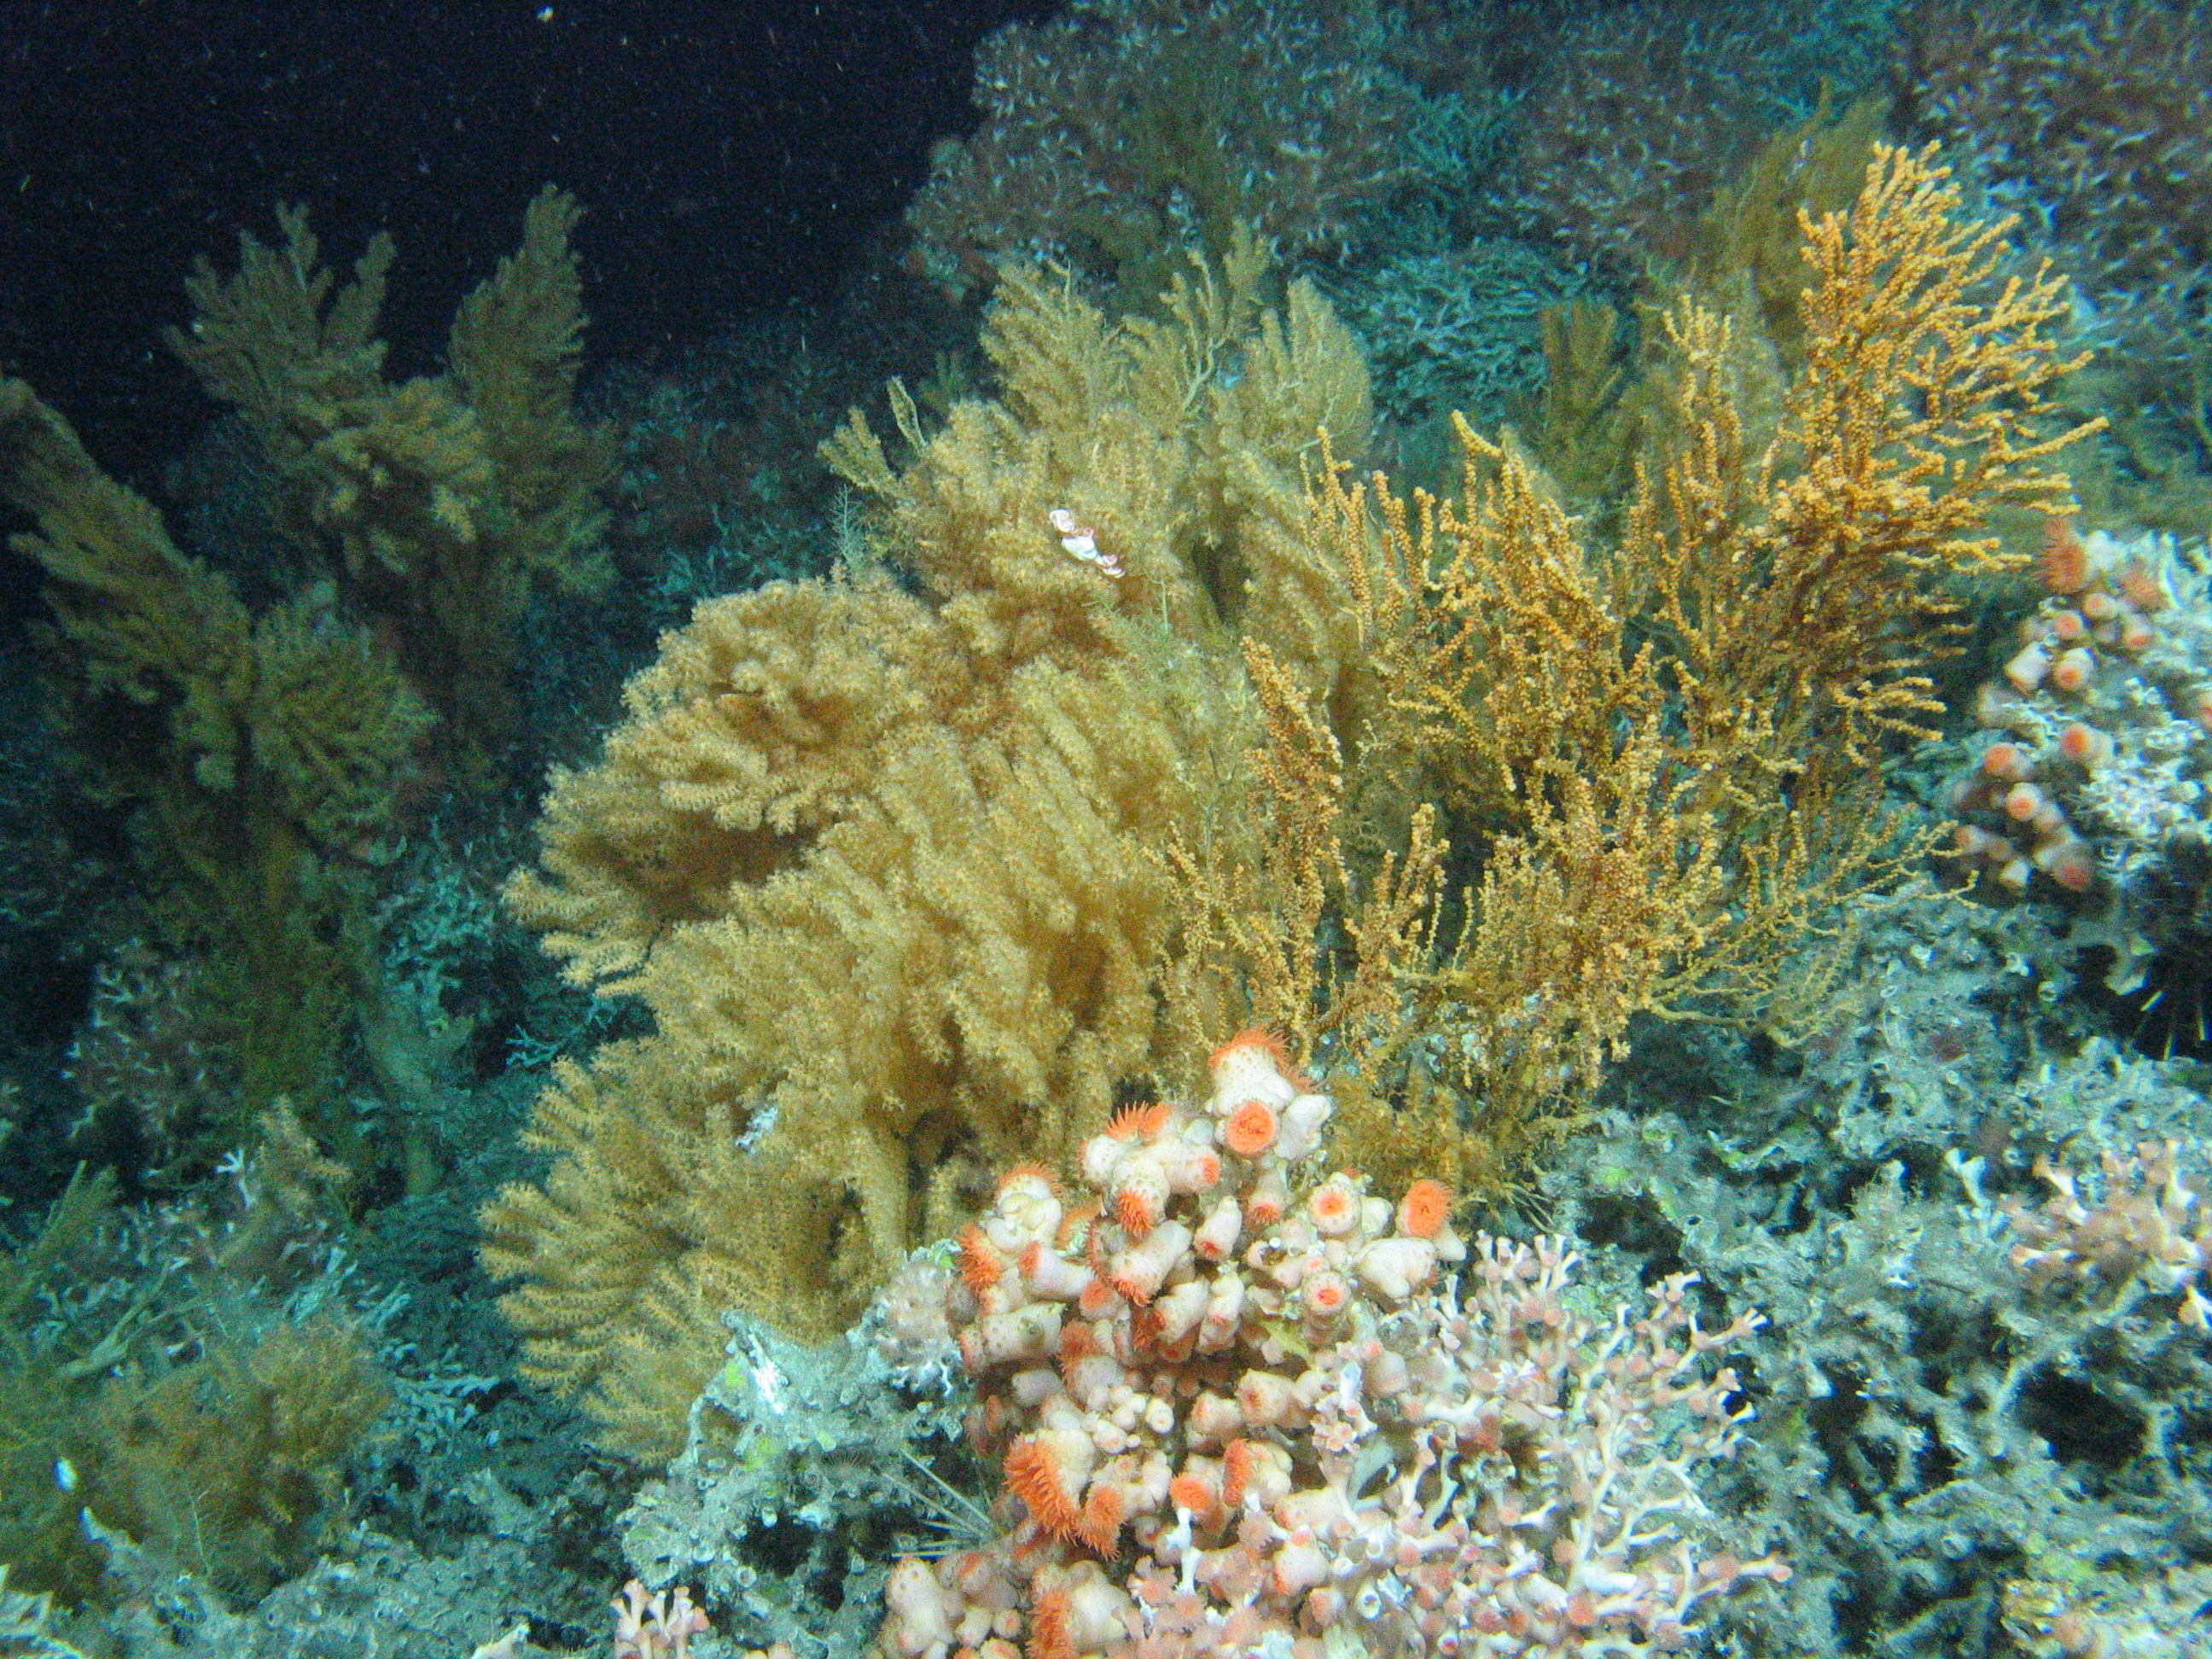 Fig 5 ATLAS studied deep sea ecosystems including cold water corals and anemones at the ROCKALL BANK CREDIT UNIVERSITY OF EDINBURGH